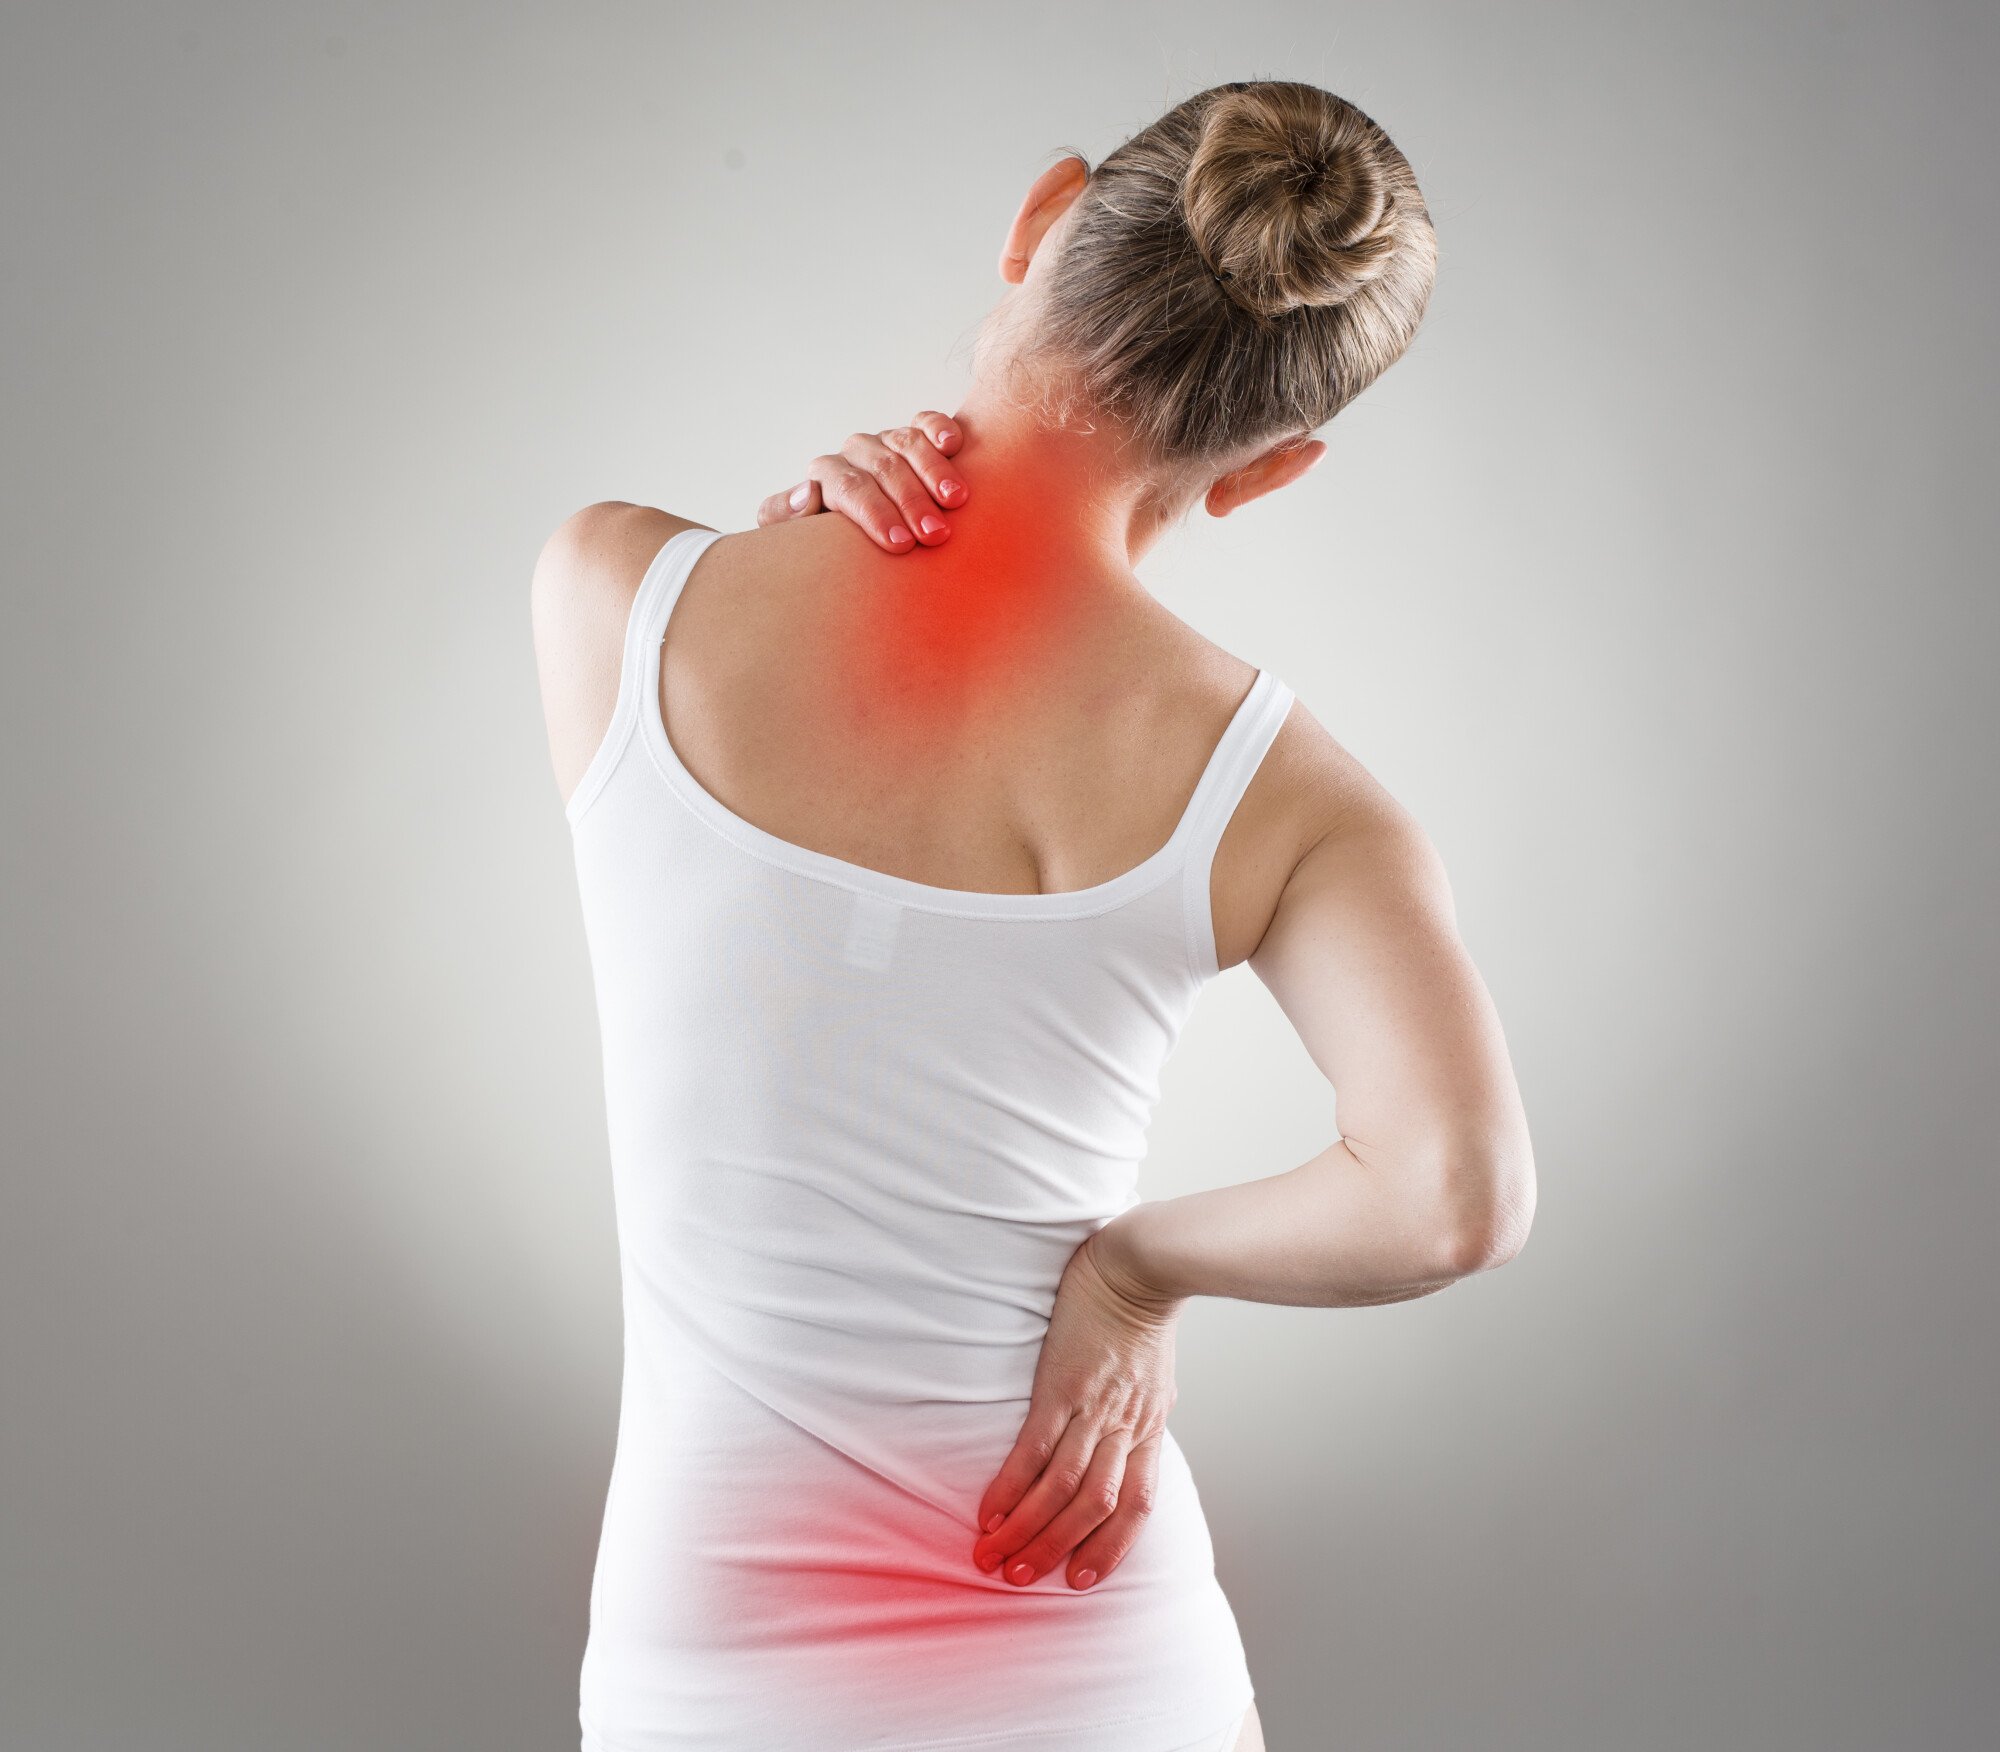 10 Common Causes of Back Pain in Women